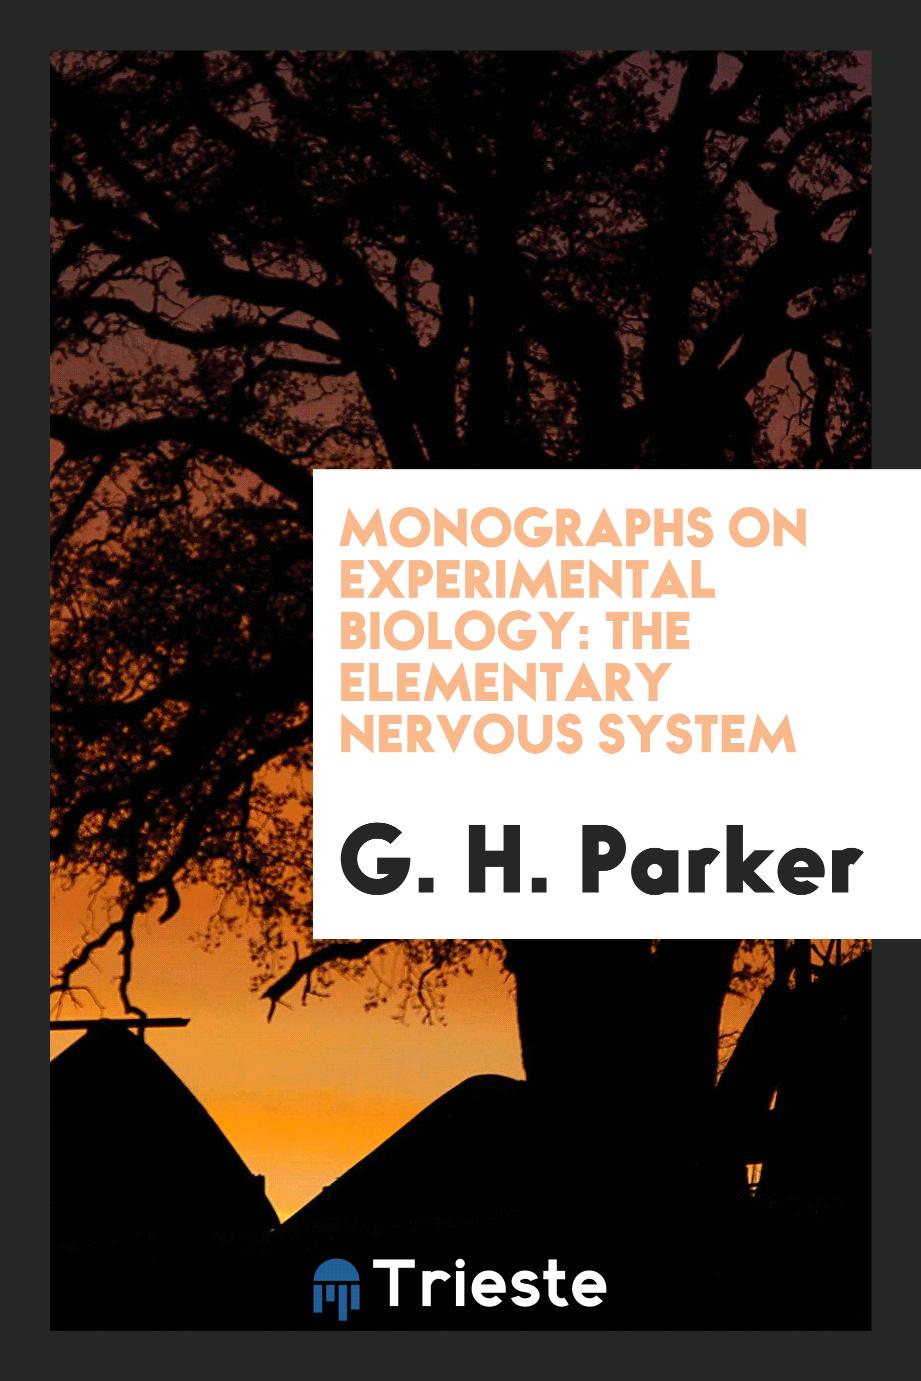 Monographs on Experimental Biology: The Elementary Nervous System